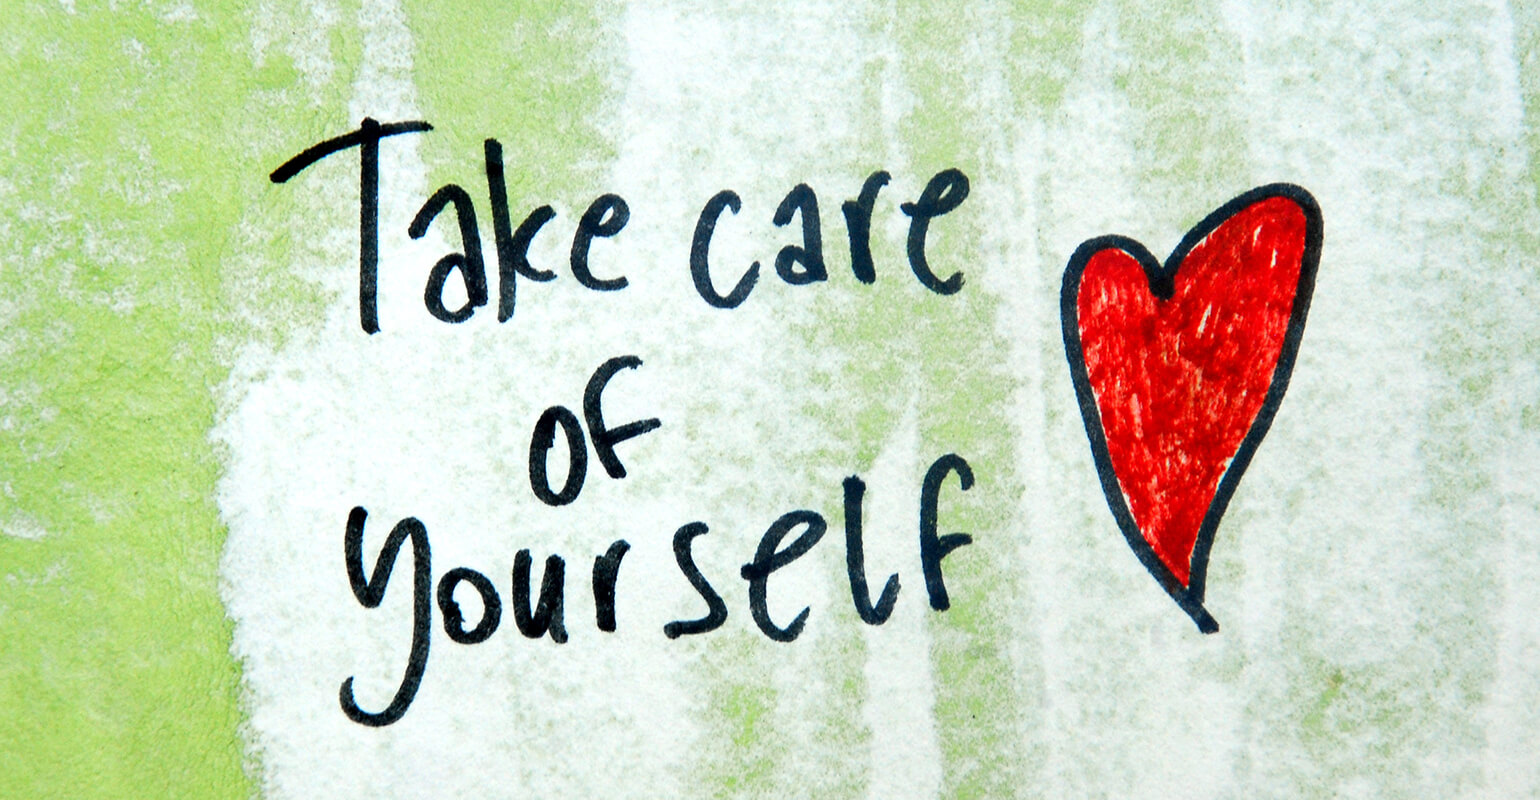 The words 'take care of yourself' hand-written on a green and white background. To the right of the words is a hand-drawn, red heart.